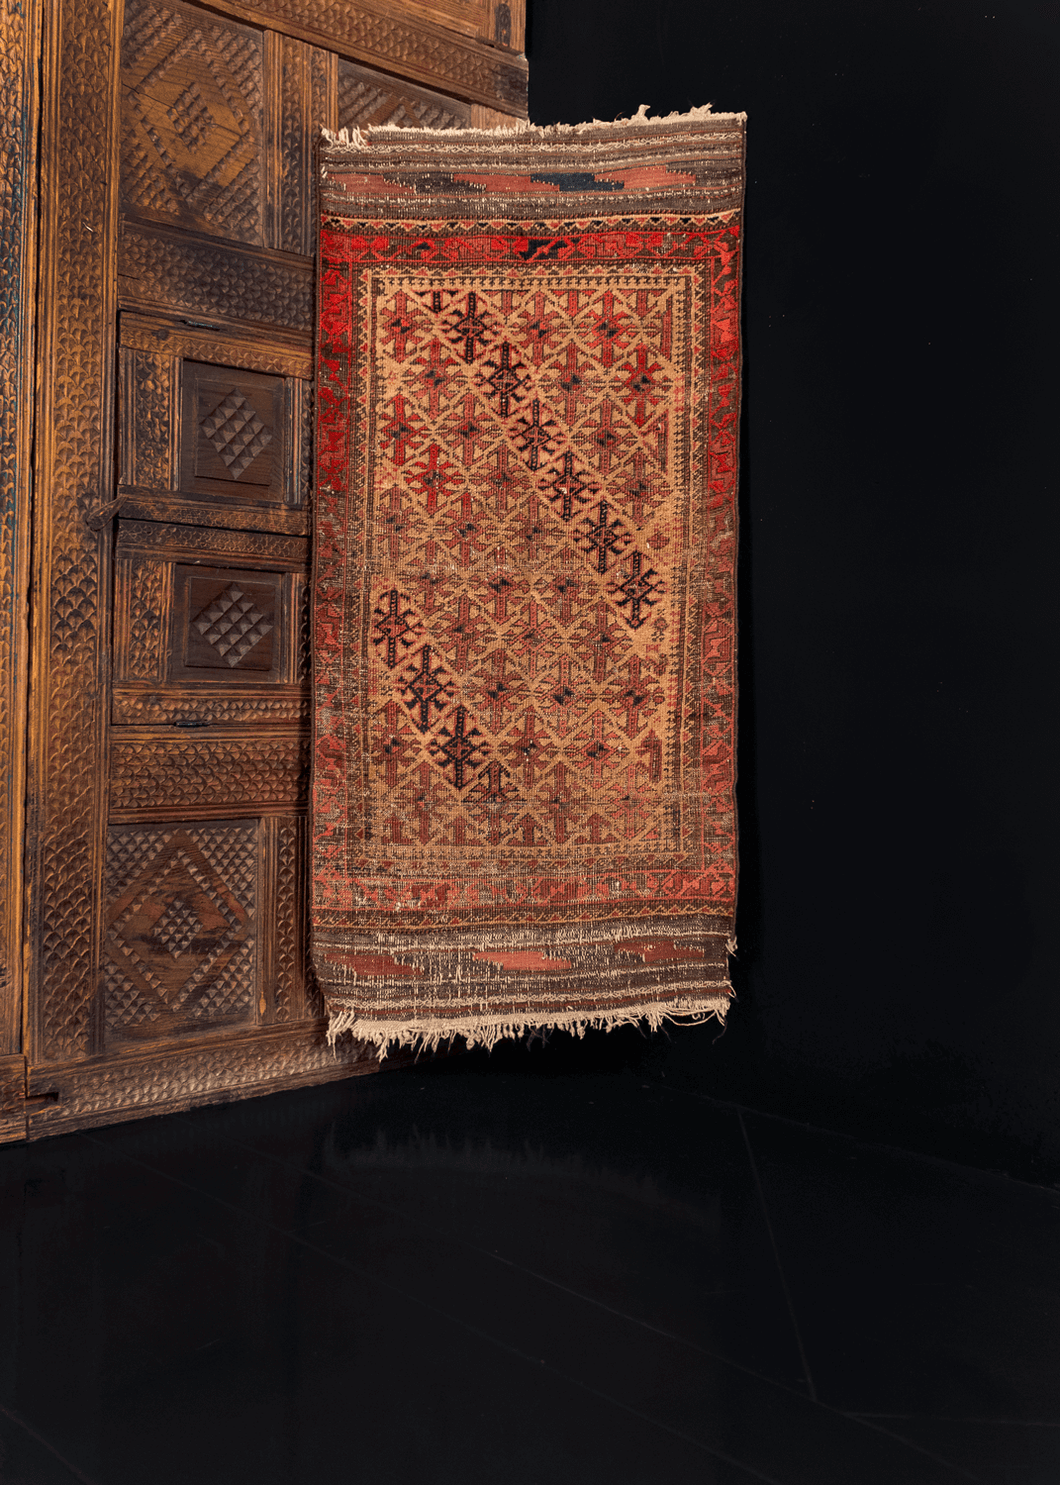 Antique Baluch rug with a hooked-diamond pattern on a camel ground, with 's' main border and kilim skirt ends. Main colors are reds, browns, and blues.